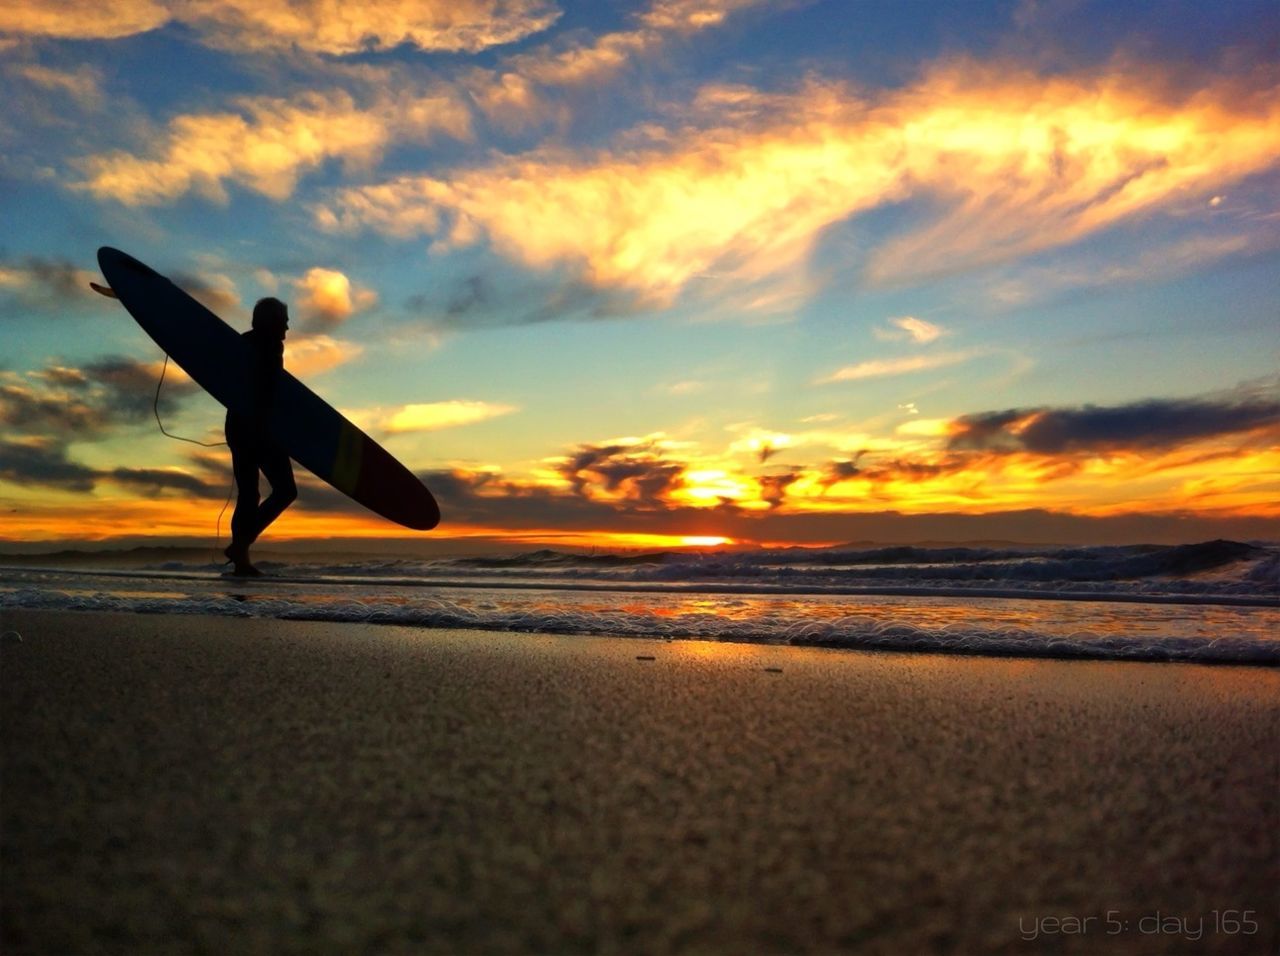 Silhouette man with surfboard at beach against sky during sunset